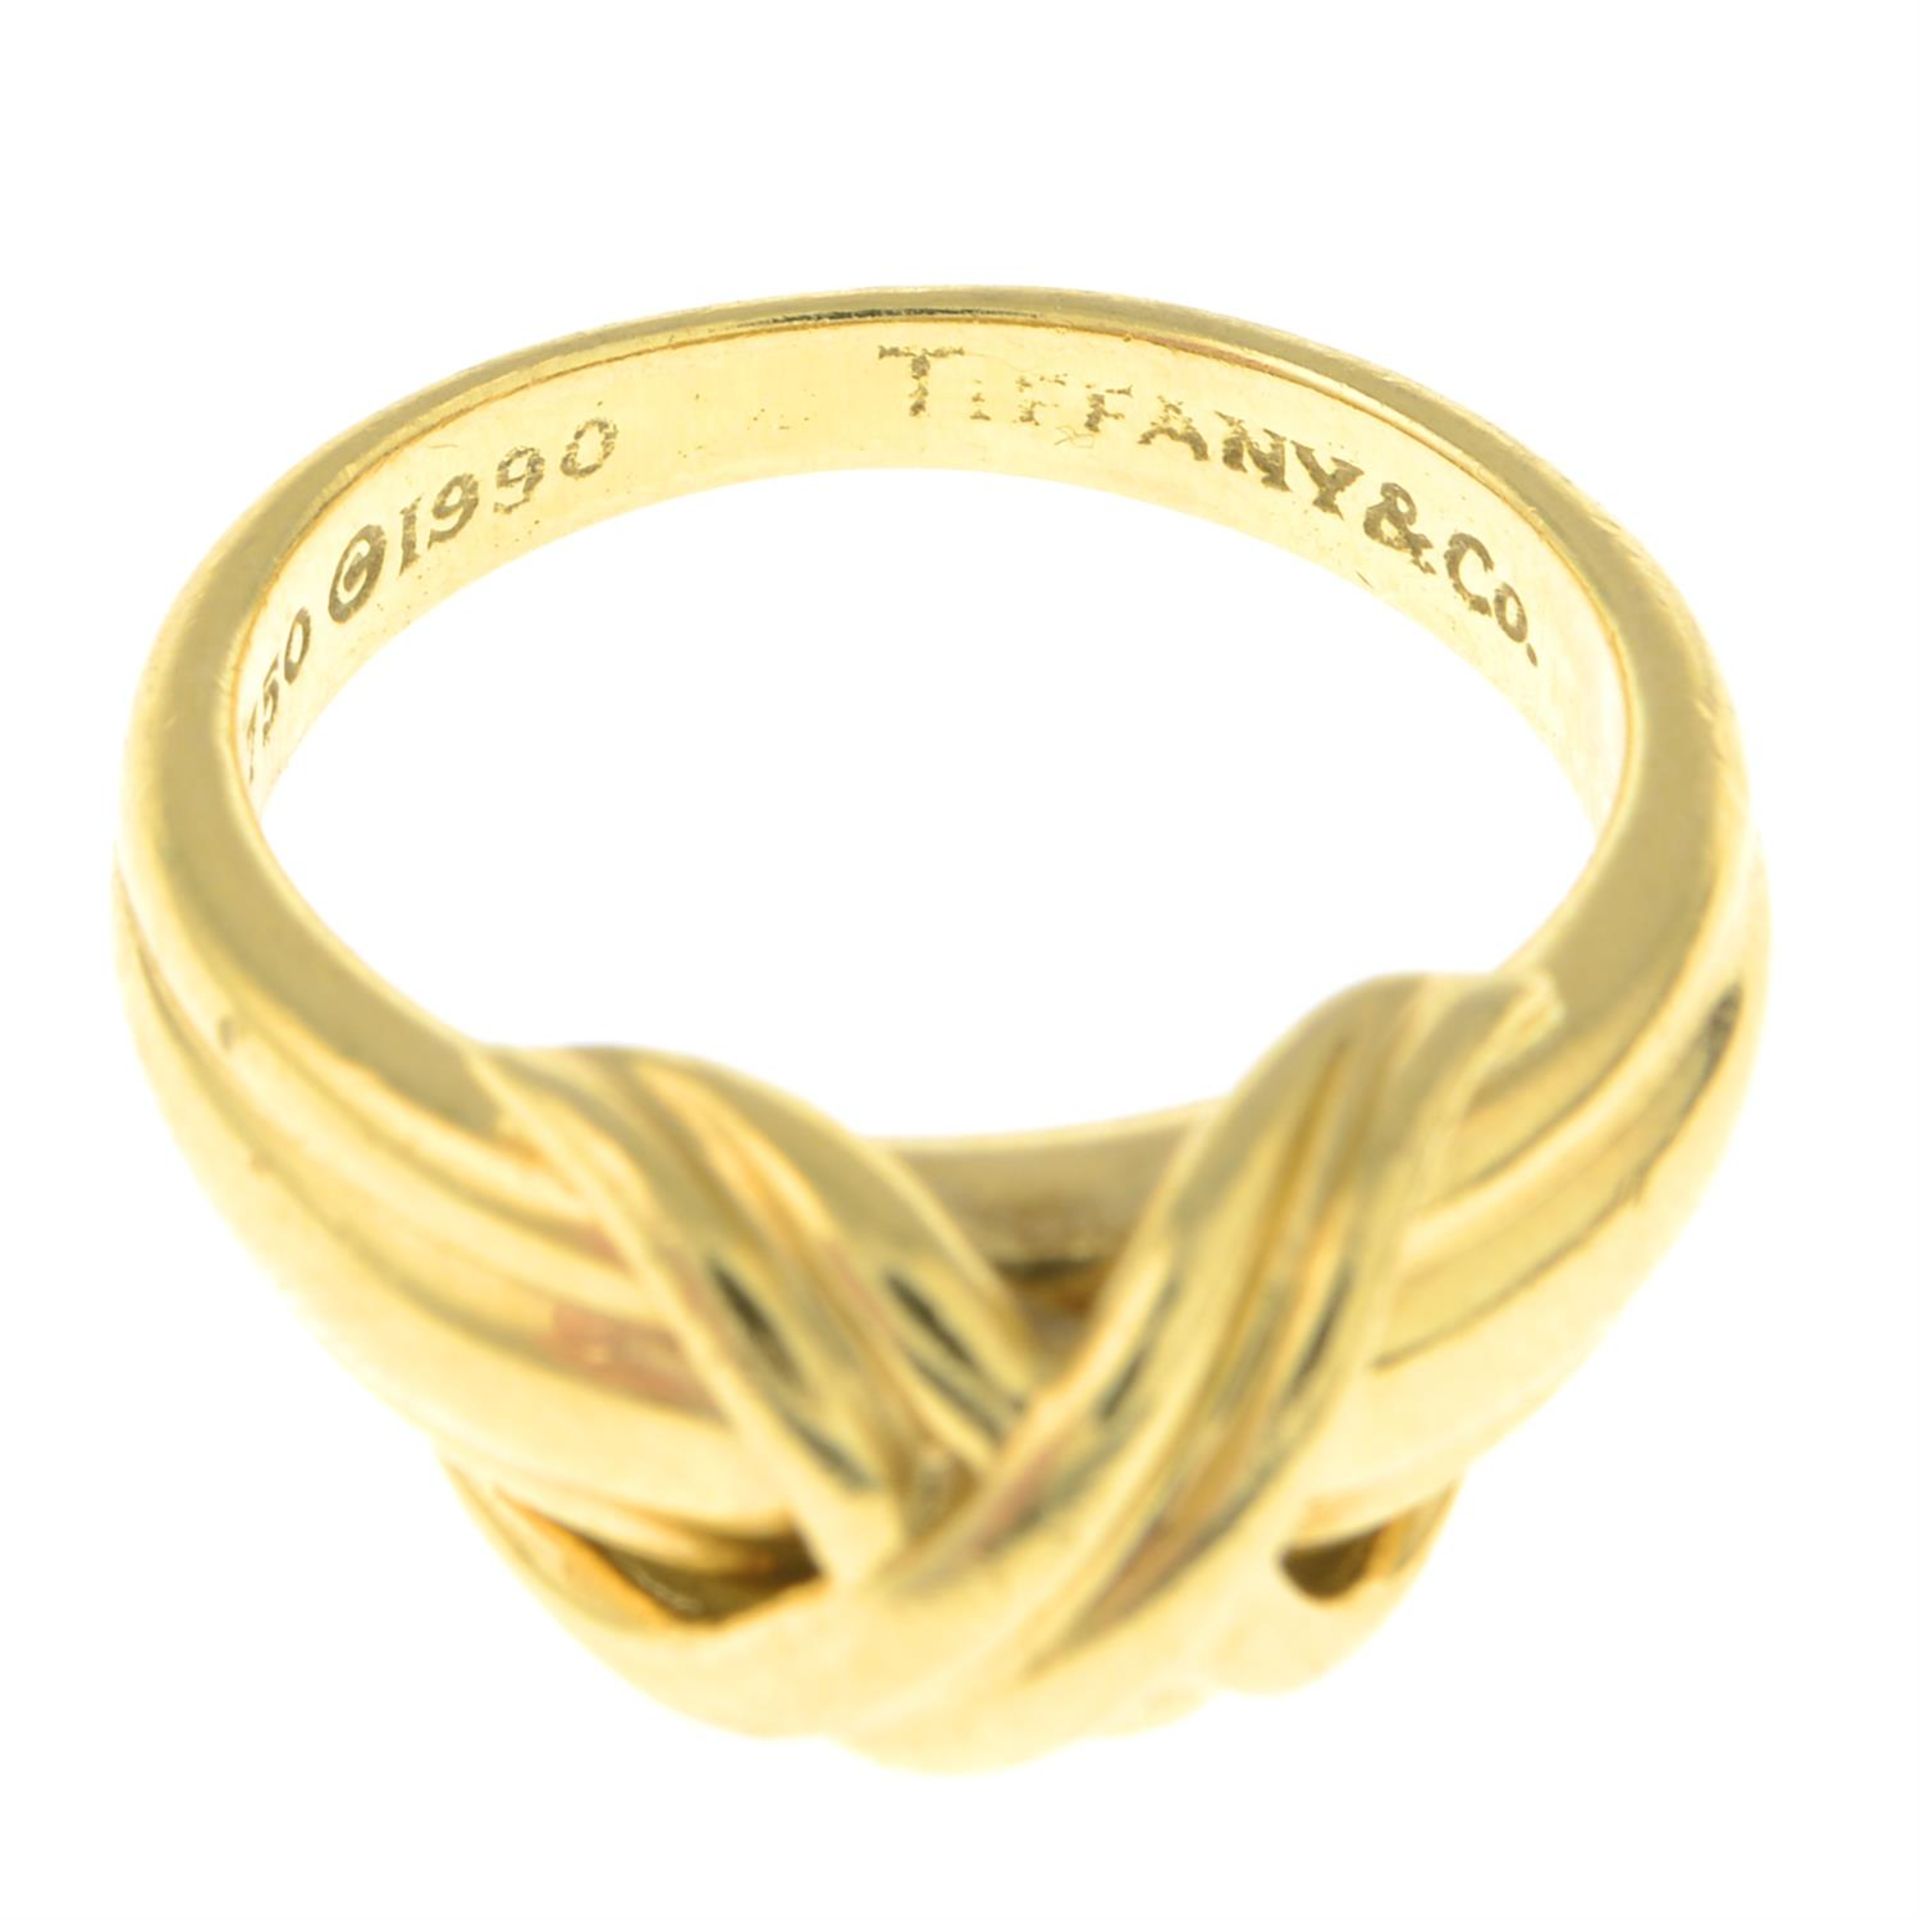 A 'Signature X' ring, by Tiffany & Co. - Image 3 of 3